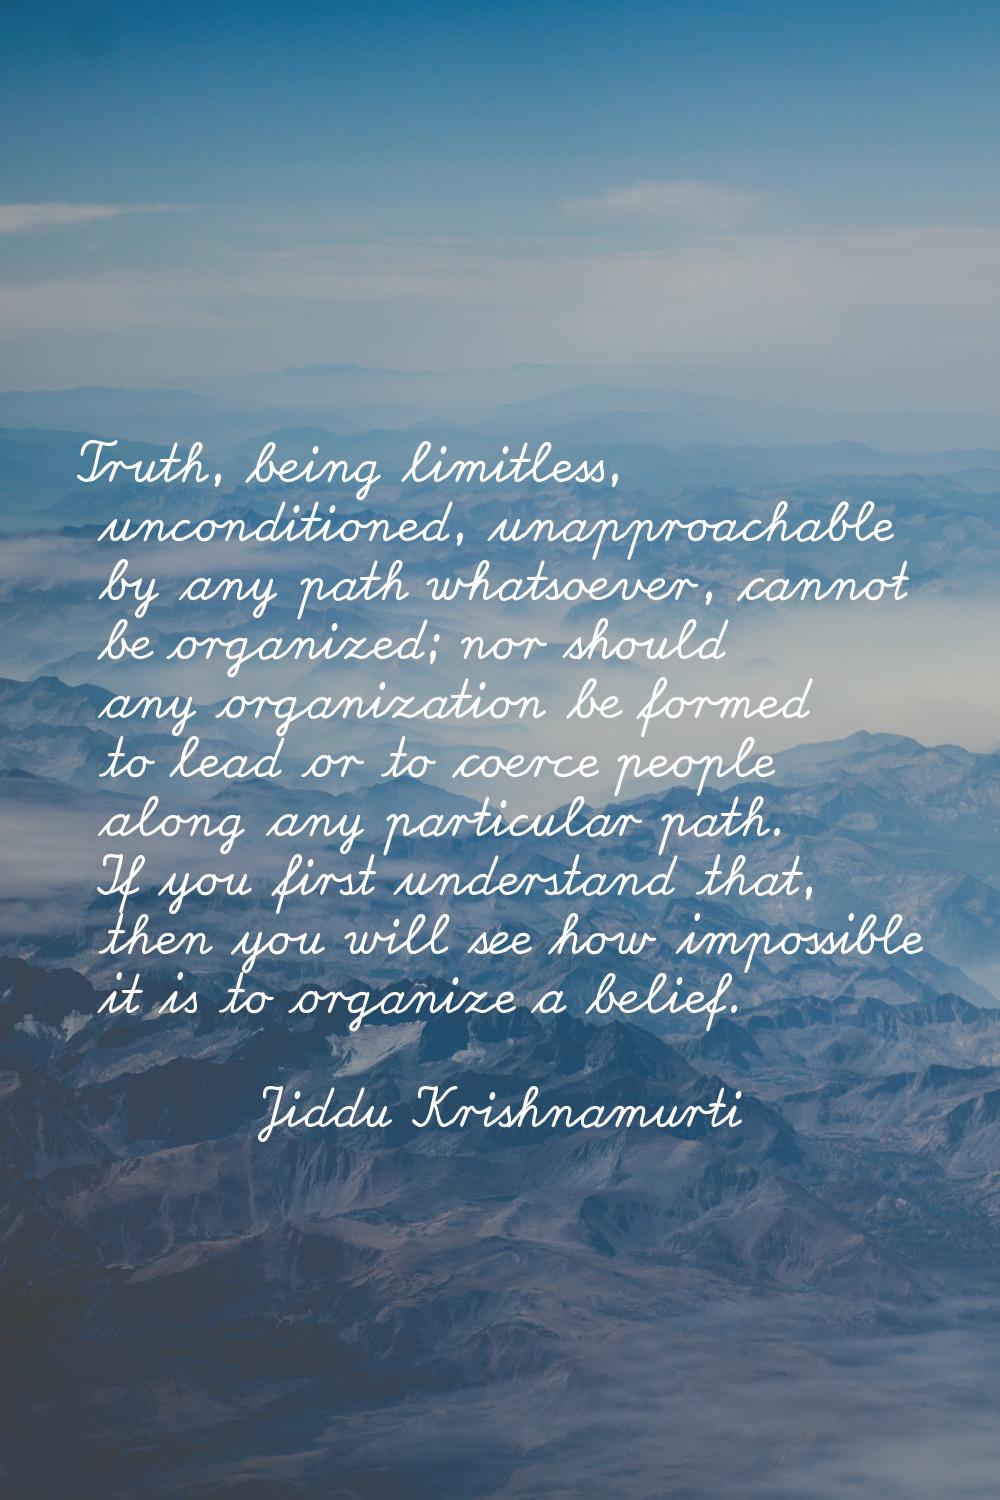 Truth, being limitless, unconditioned, unapproachable by any path whatsoever, cannot be organized; 